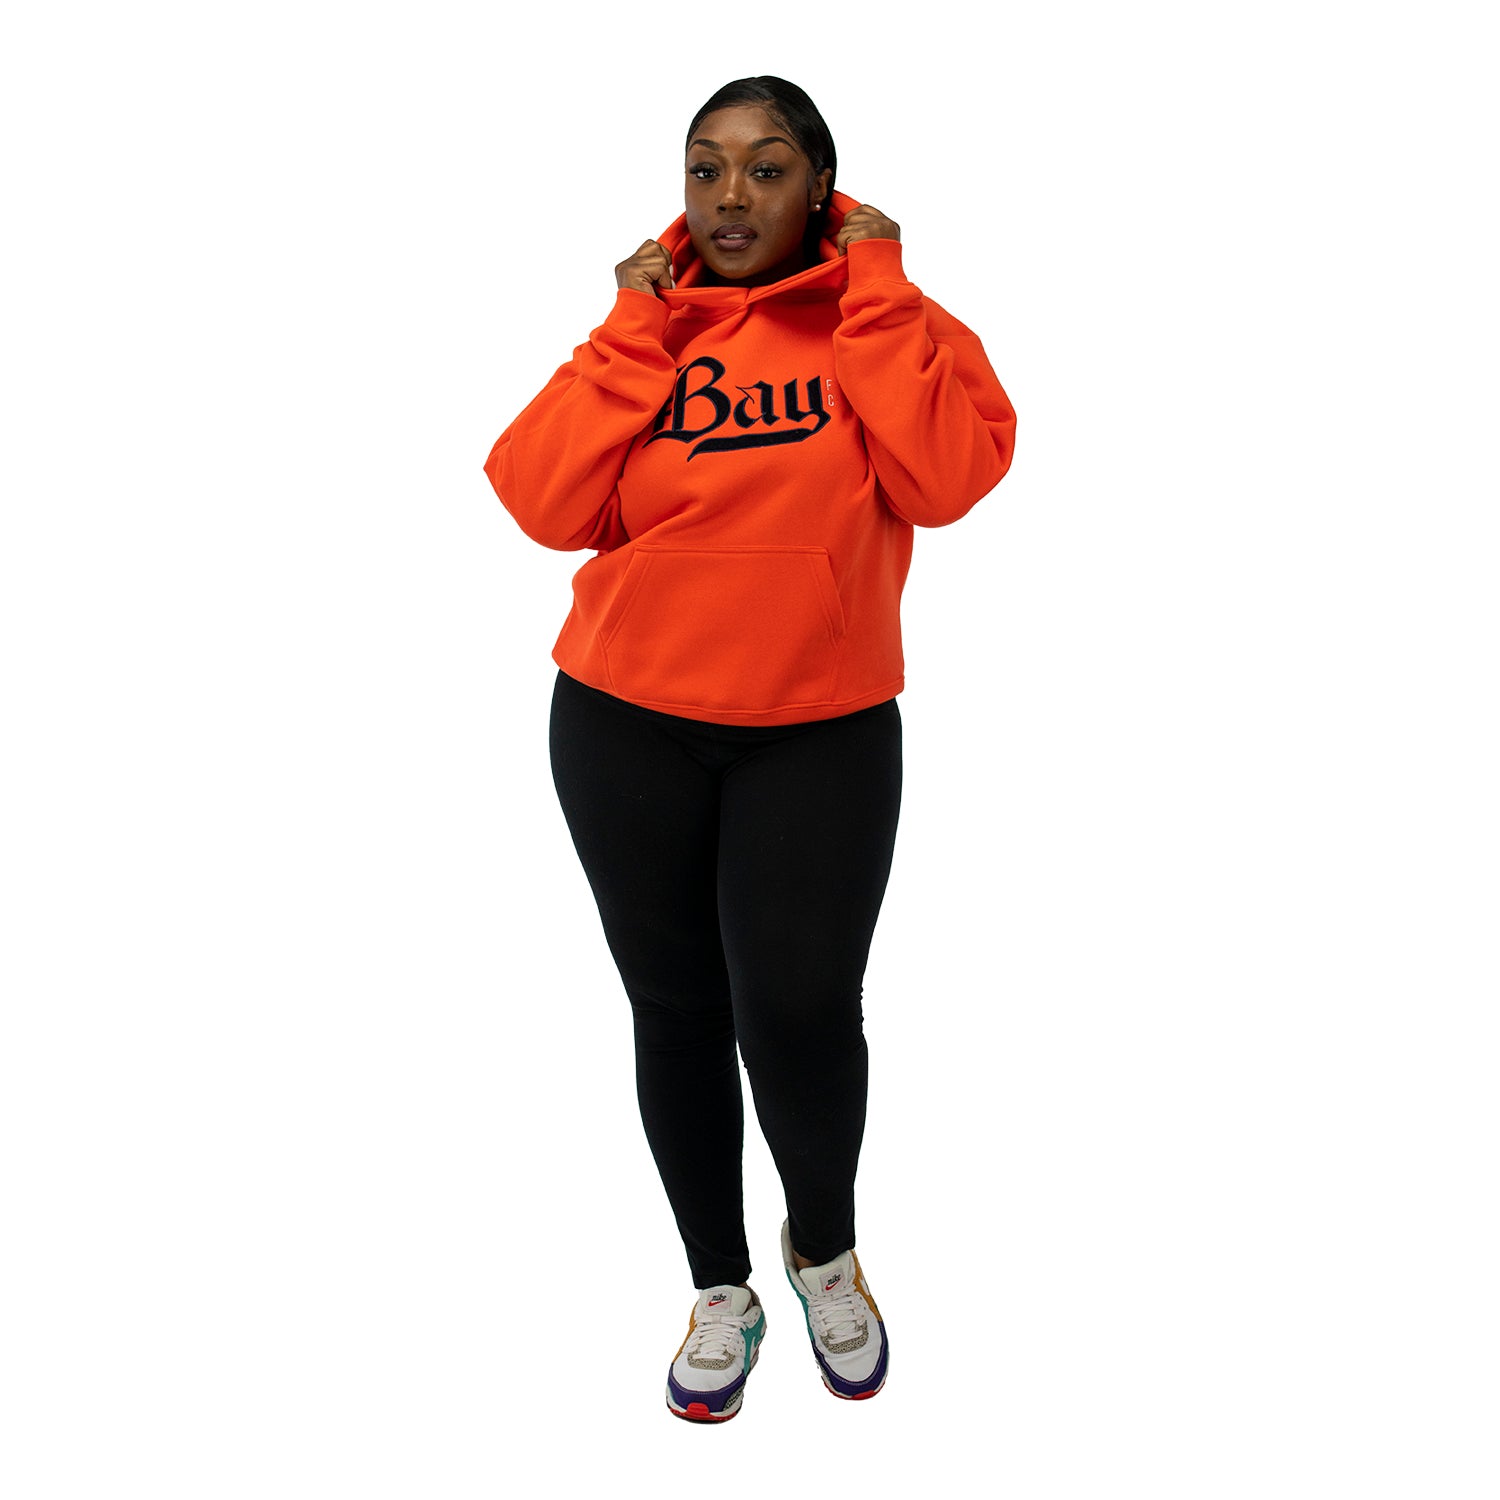 Unisex Official Bay FC Oversized Corduroy Poppy Hoodie - On Model Full Body Front View